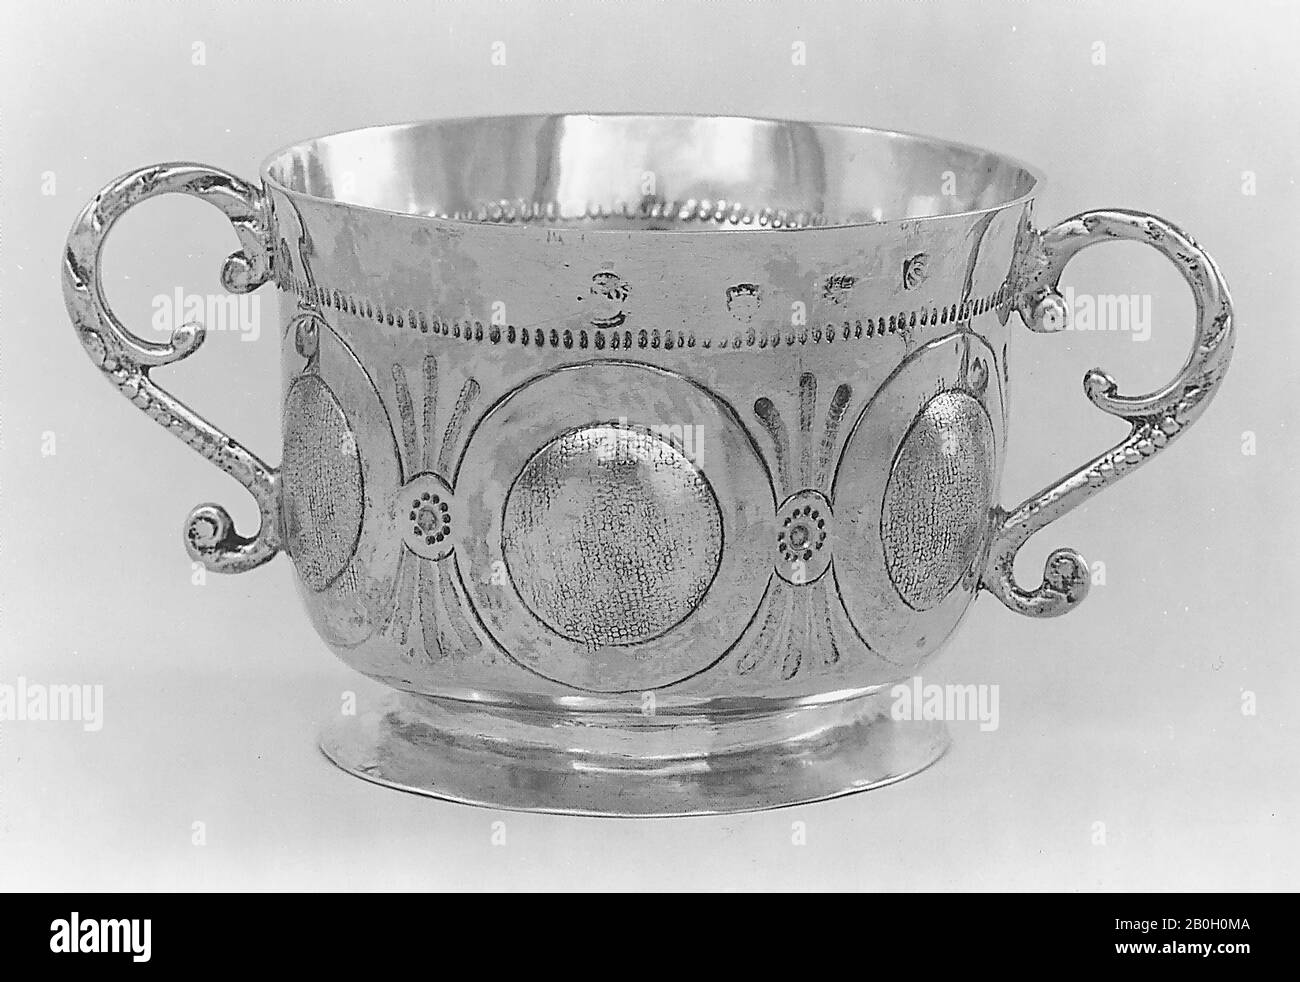 Maker's mark illegible, English, Two-Handled Cup, 1655/56, Silver, 3 1/8 x 6 1/4 x 4 3/16 in. (7.9 x 15.9 x 10.6 cm Stock Photo